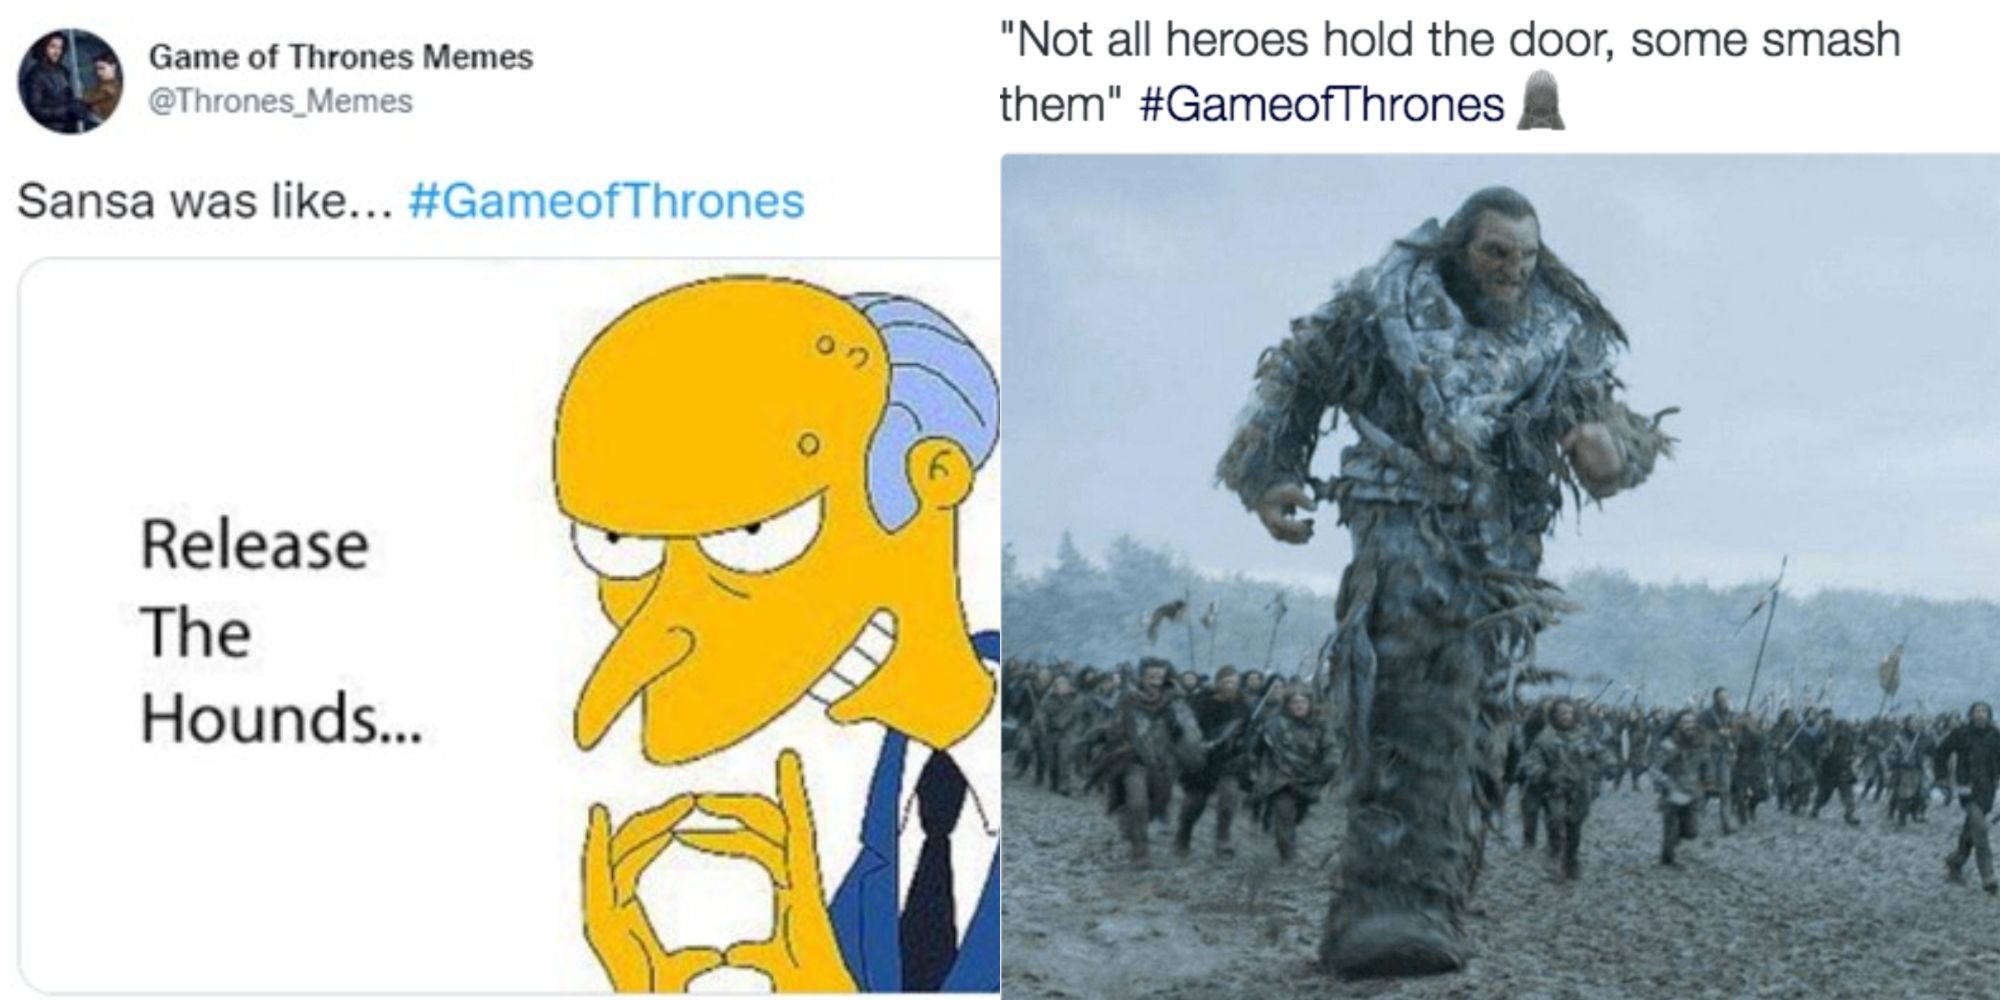 Memes from Battle of the Bastards in Game of Thrones.